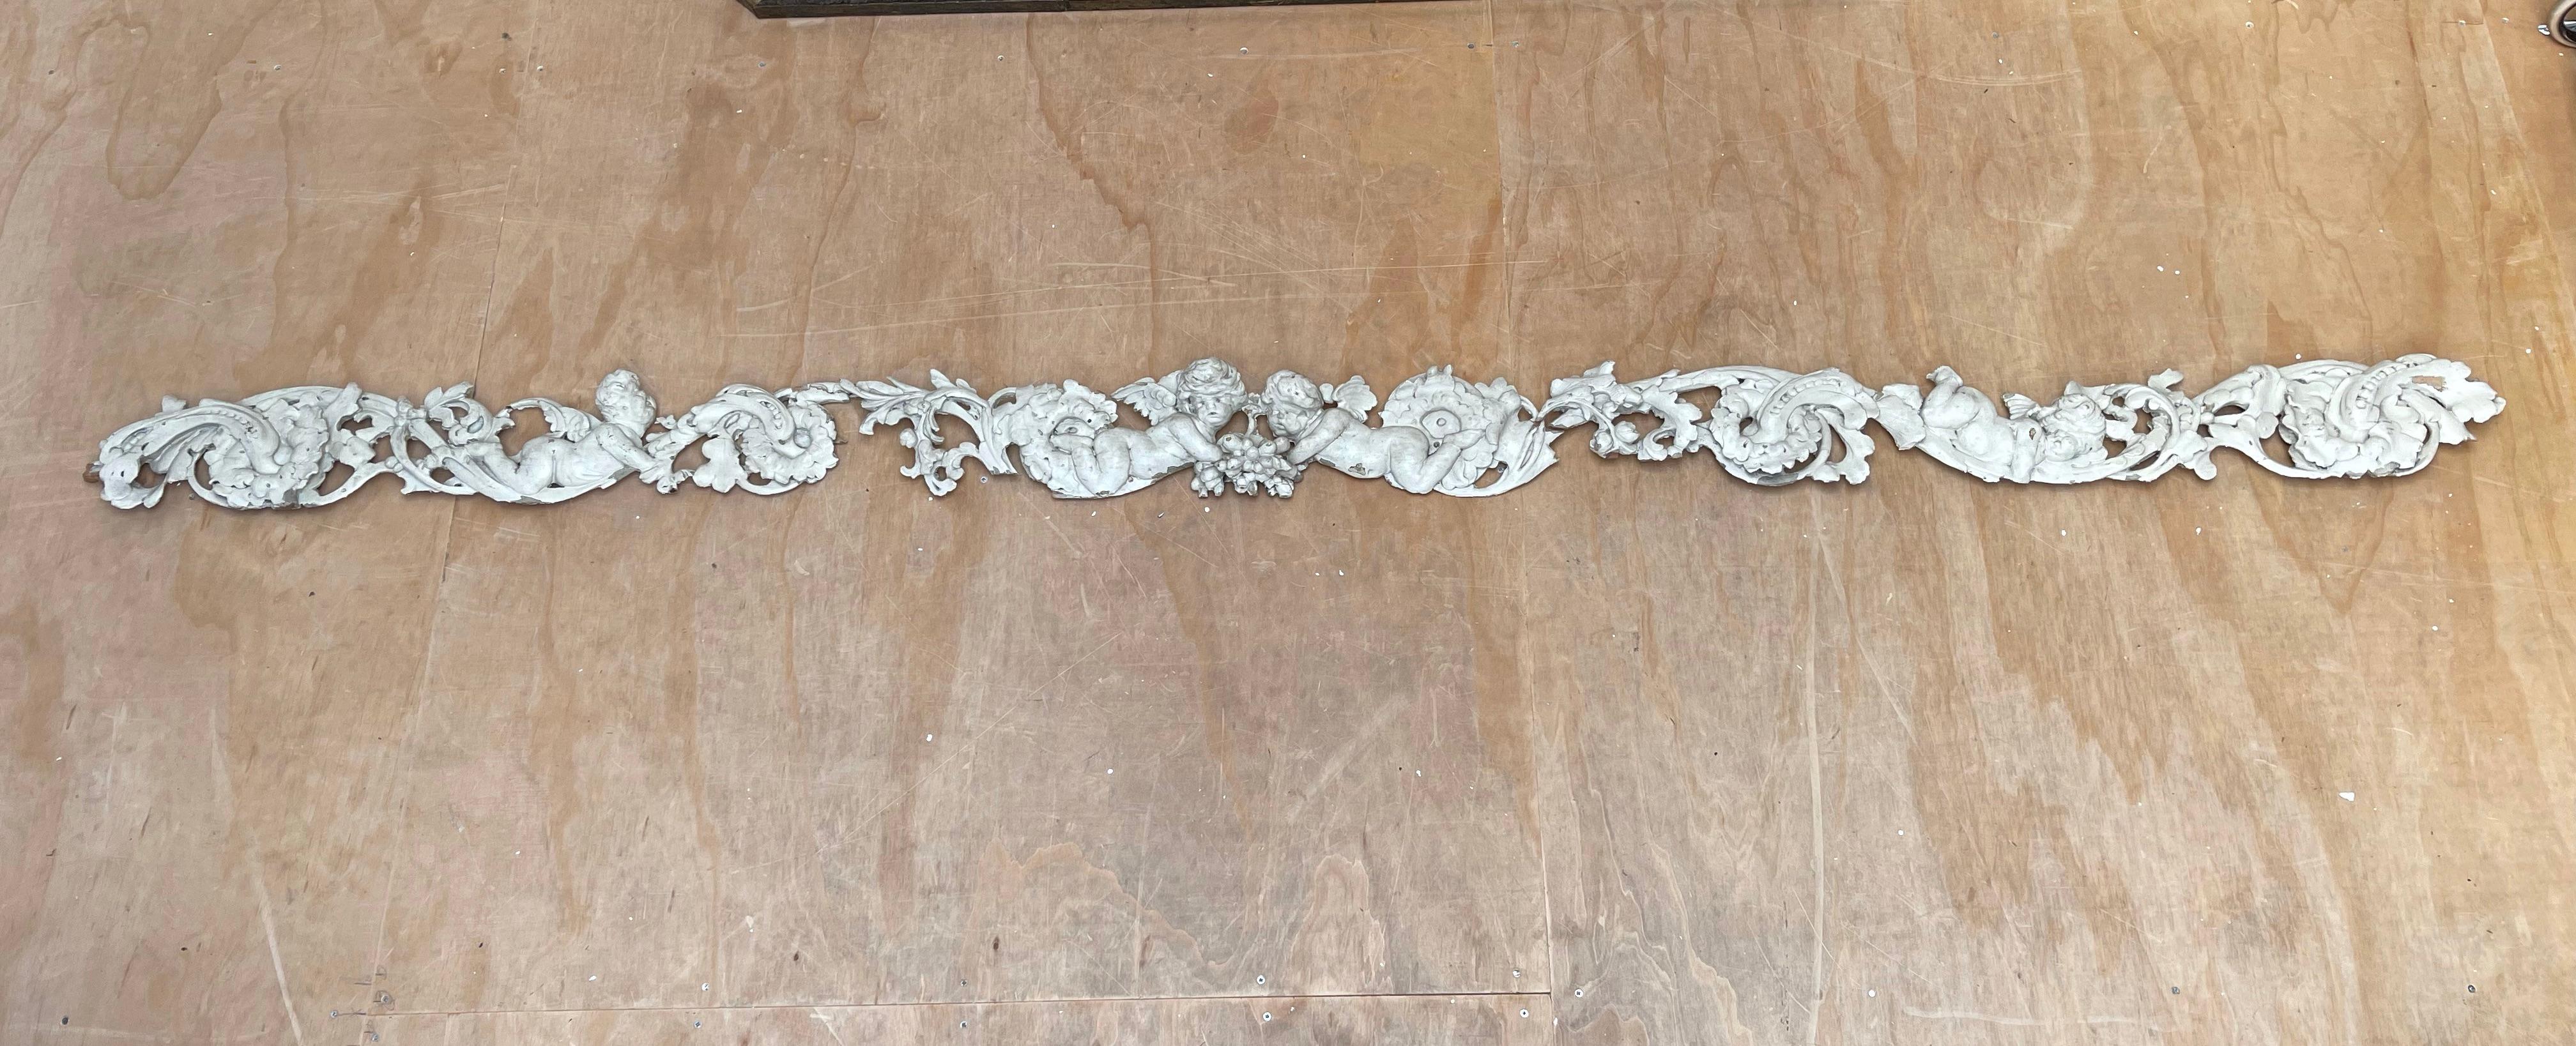 Antique architectural, painted nutwood 'molding' for wall or ceiling mounting, 9 feet in length.

If you are looking to integrate amazing architectural antiques into an old or new building then this extremely rare and all hand-carved Baroque